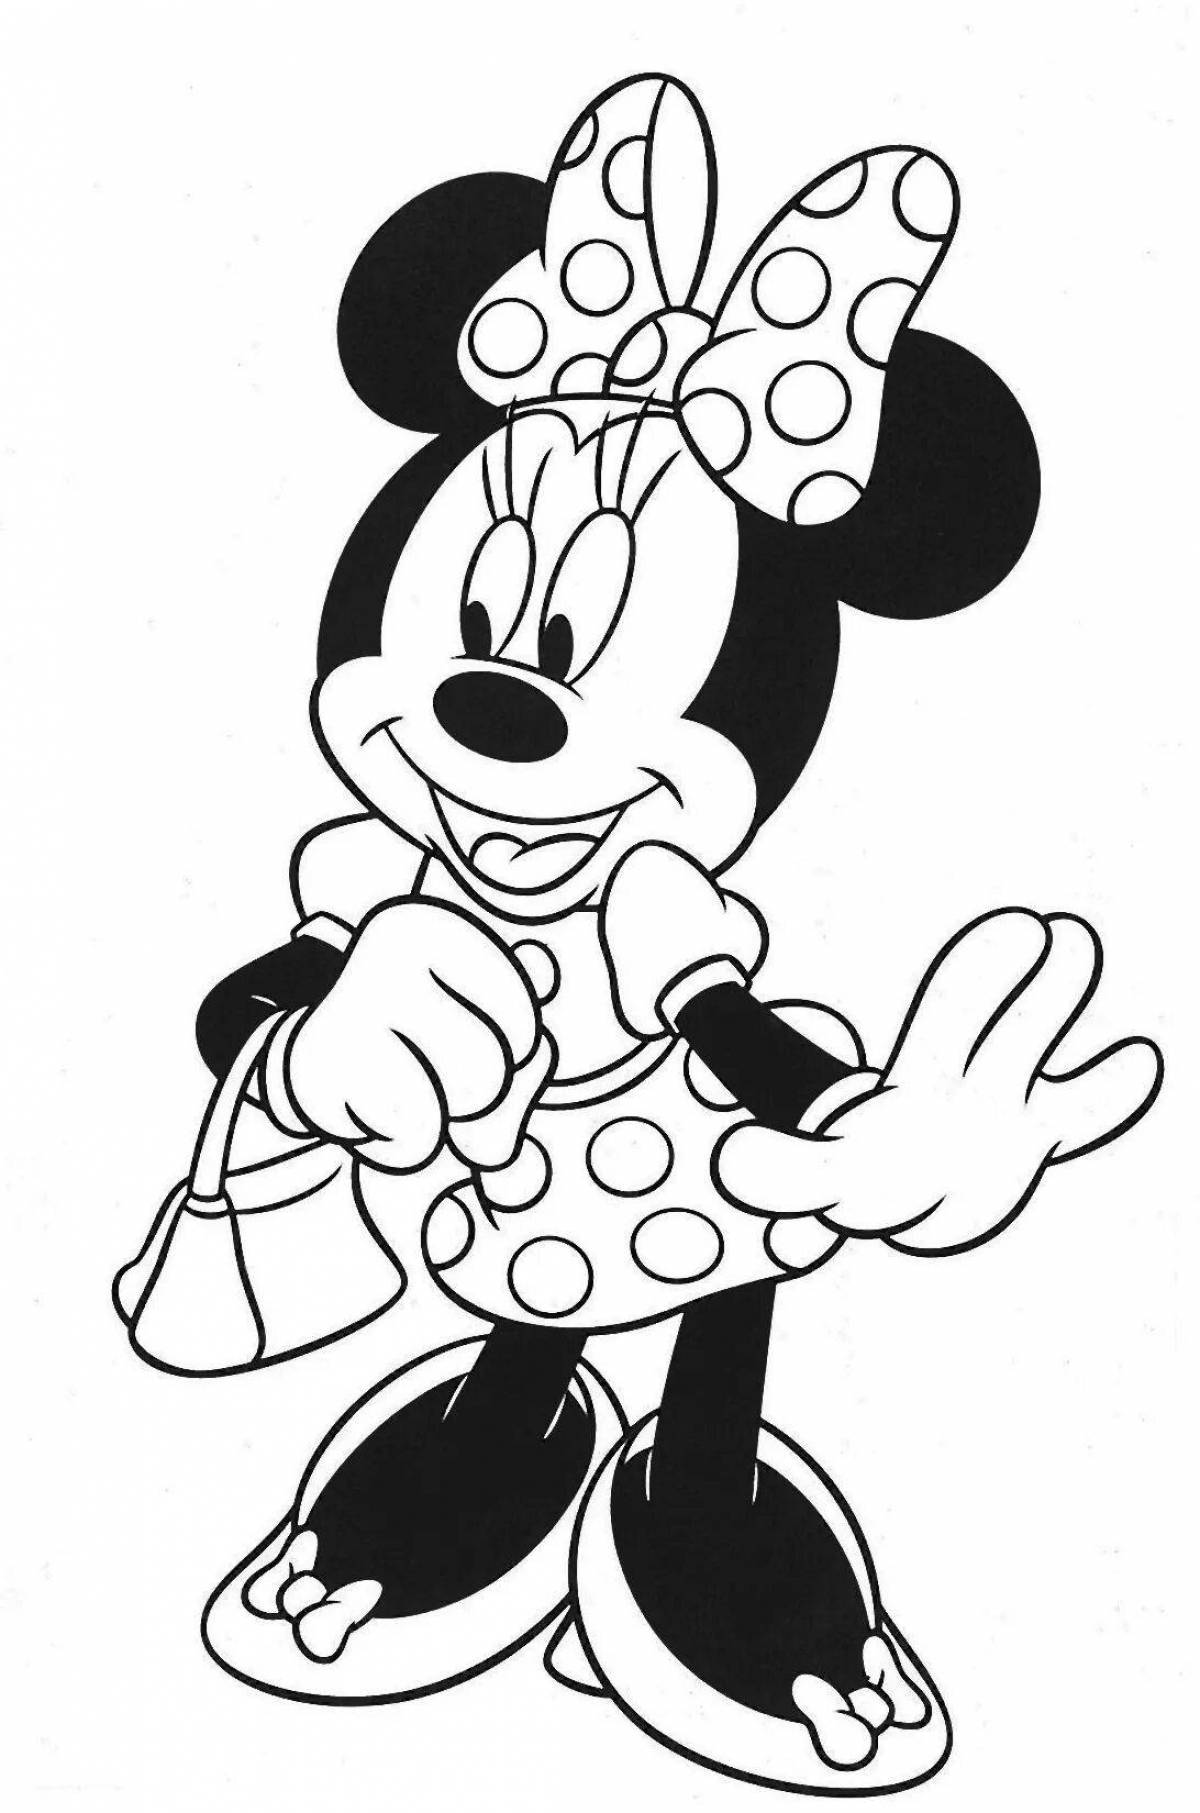 Mikimaus coloring pages for babies filled with colors